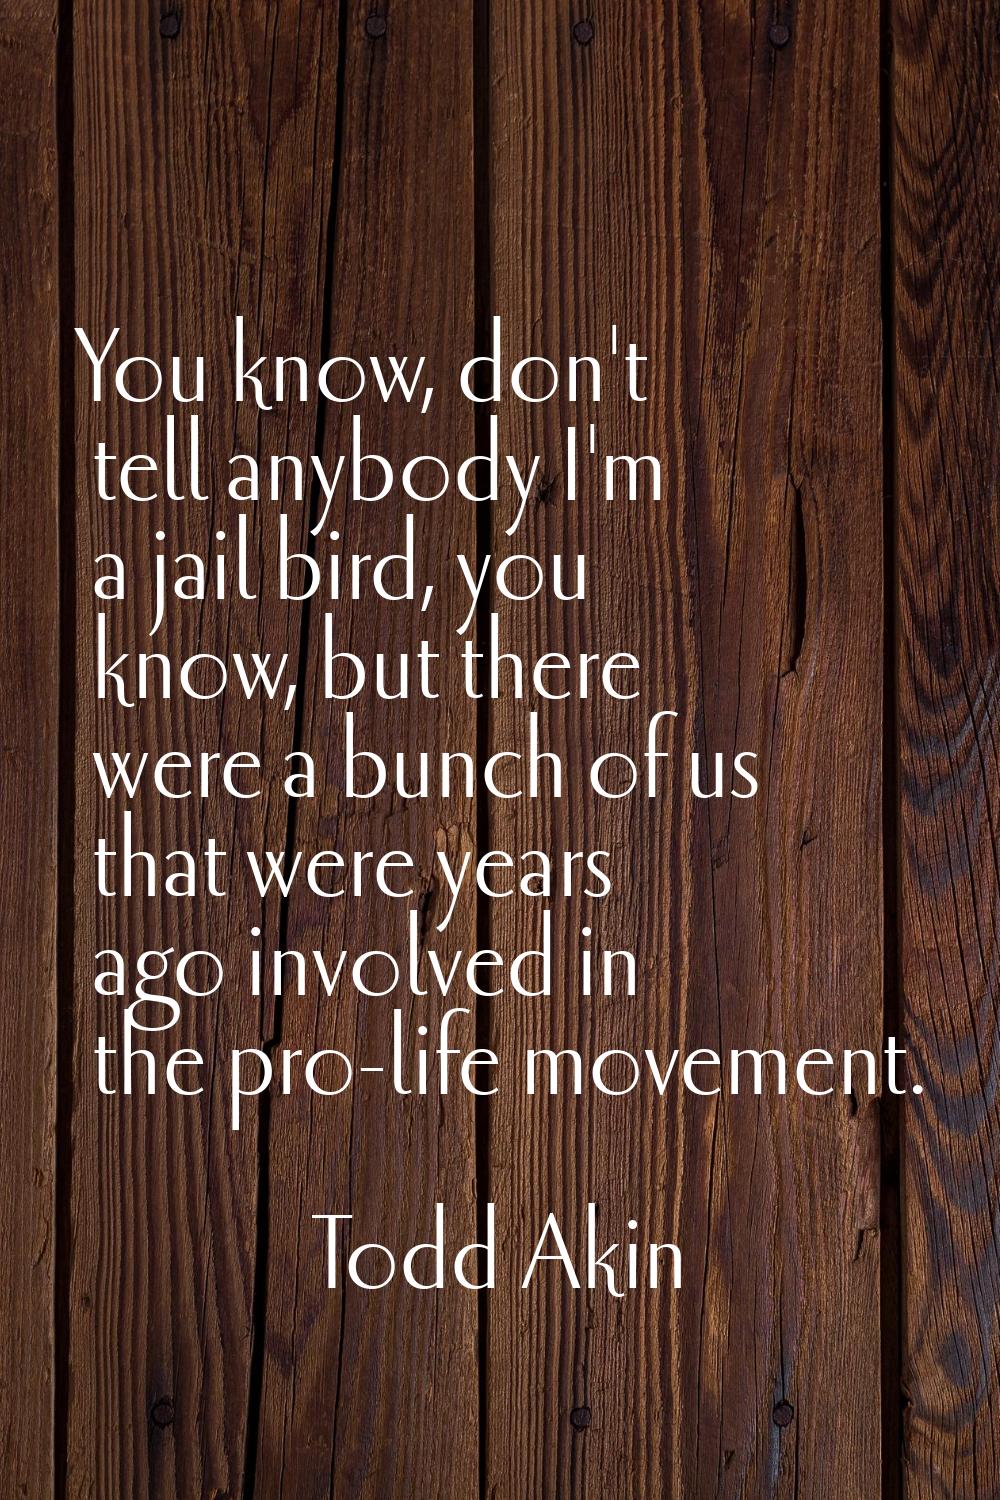 You know, don't tell anybody I'm a jail bird, you know, but there were a bunch of us that were year